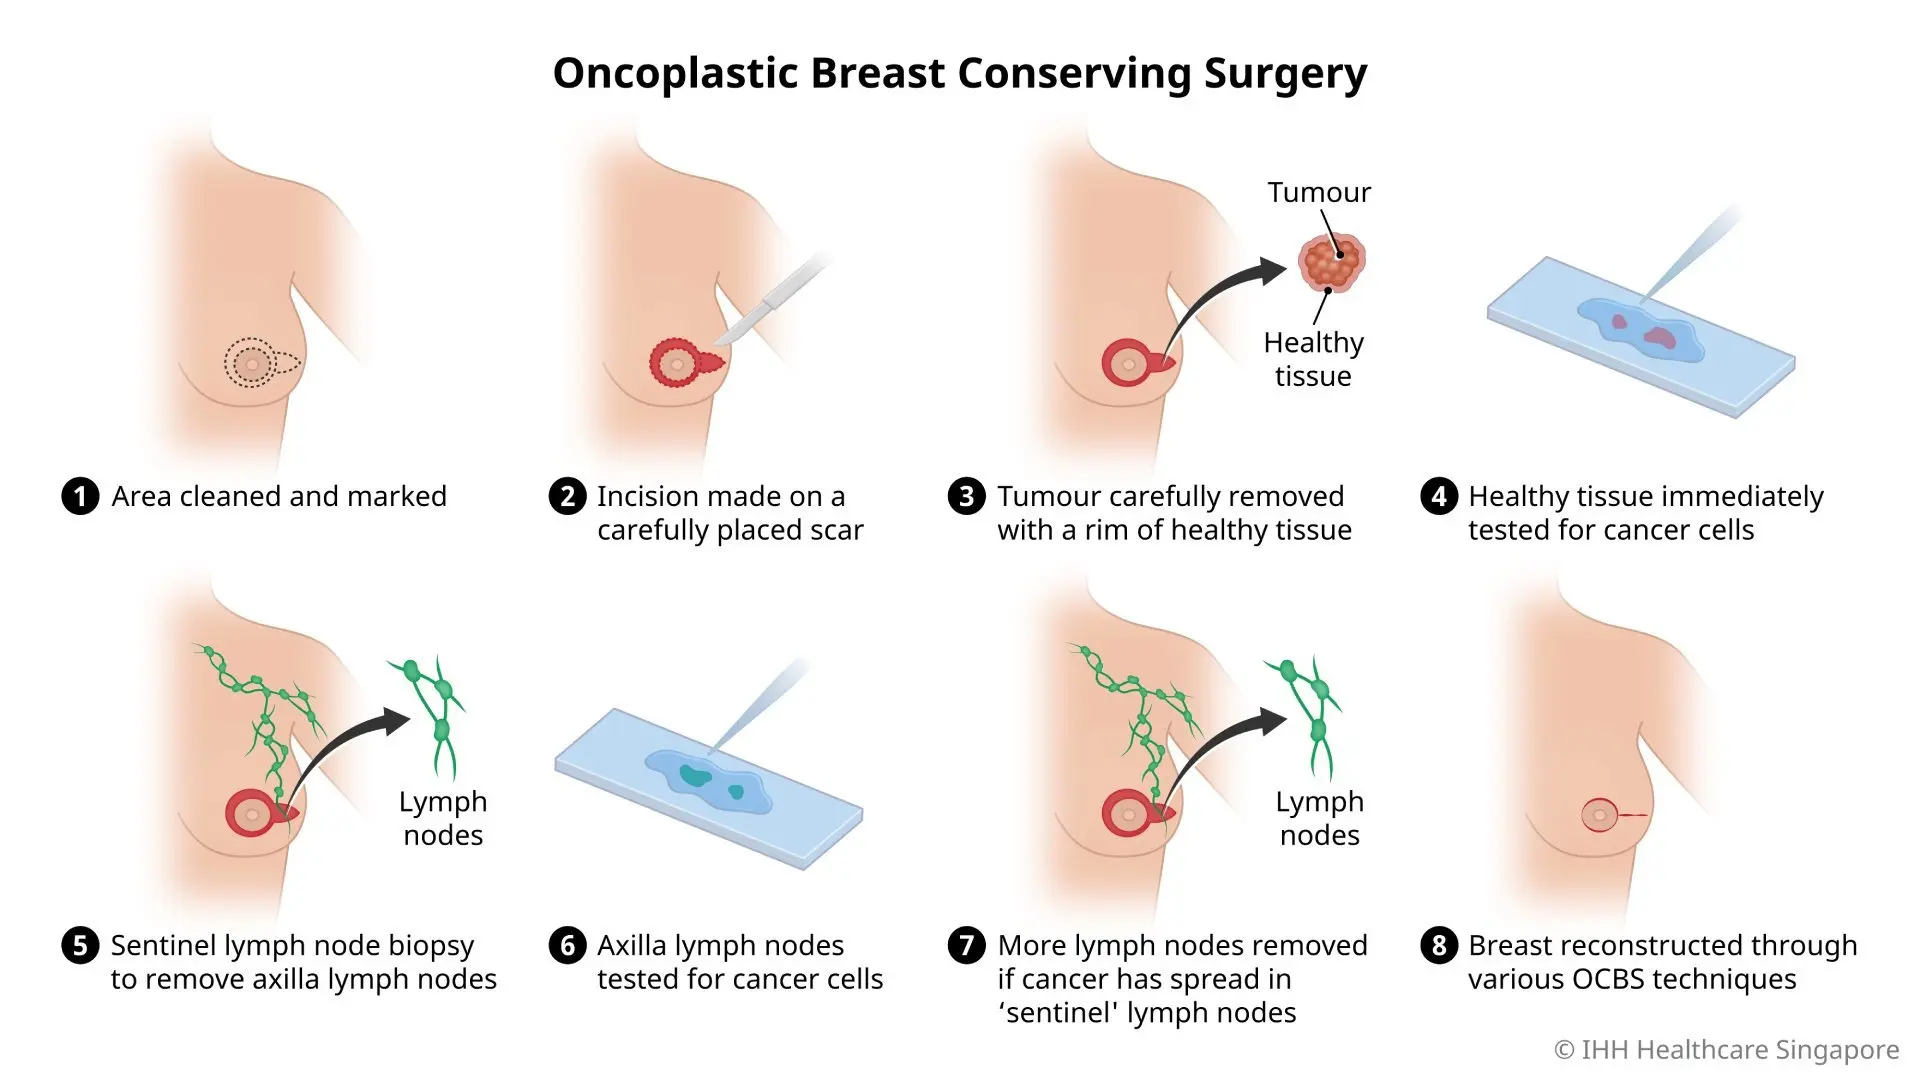 Illustration of the steps in an oncoplastic breast-conserving surgery.